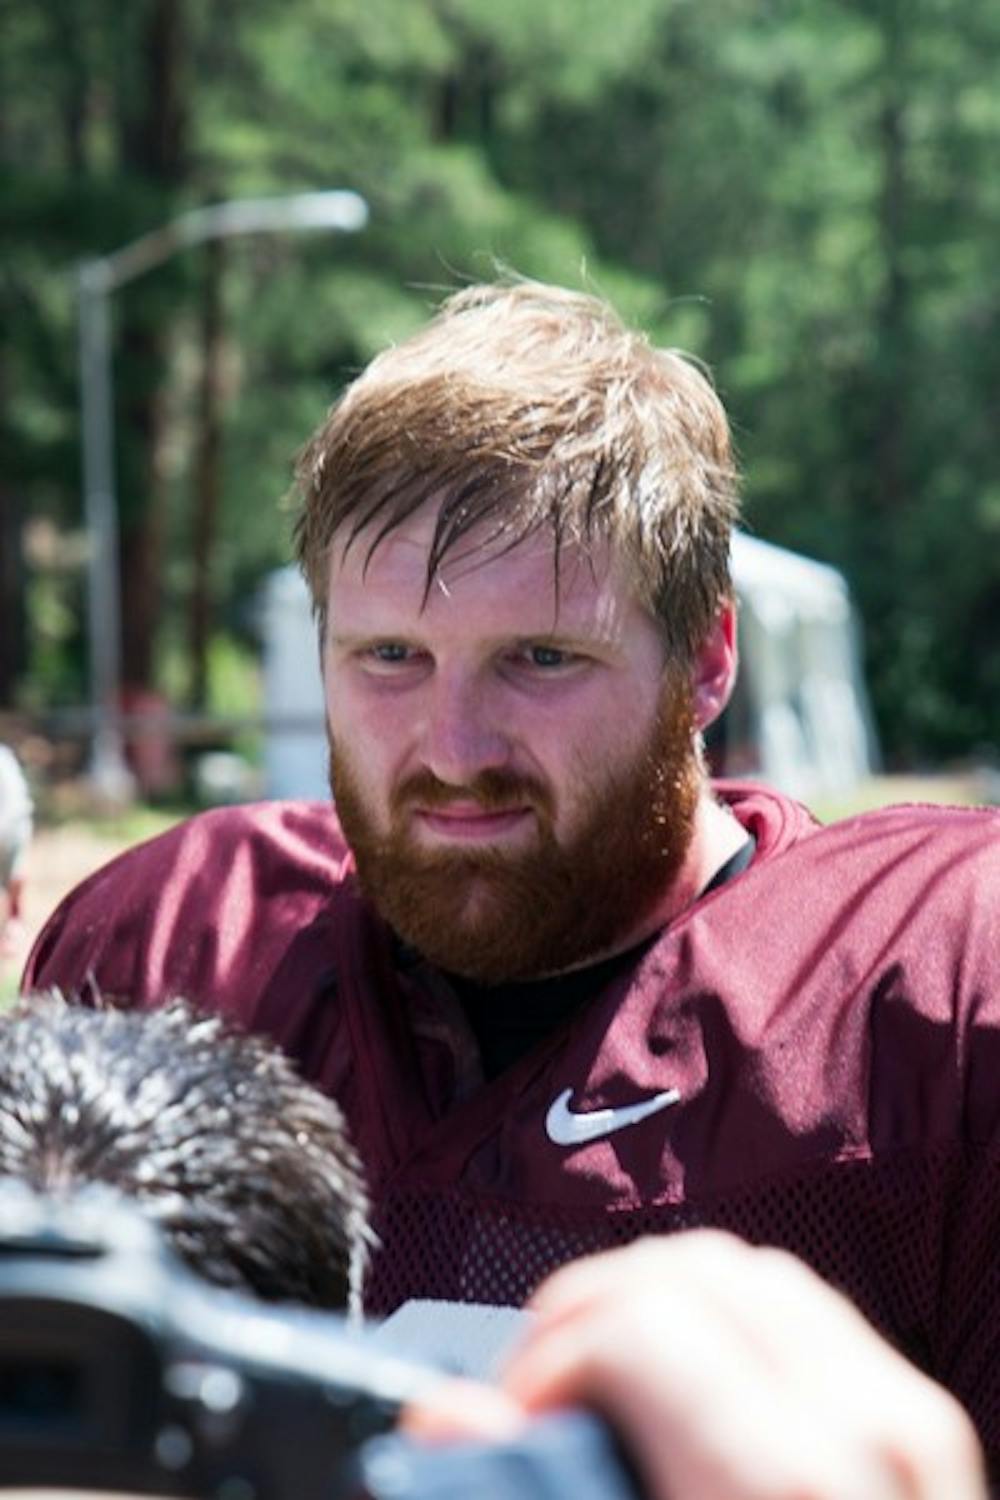 Redshirt senior offensive lineman Chip Sarafin speaks to reporters after a practice at Camp Tontozona Aug 14. Sarafin made national headlines on Aug 13 after becoming the first active openly gay player in Division I college football. (Photo by Andrew Ybanez)